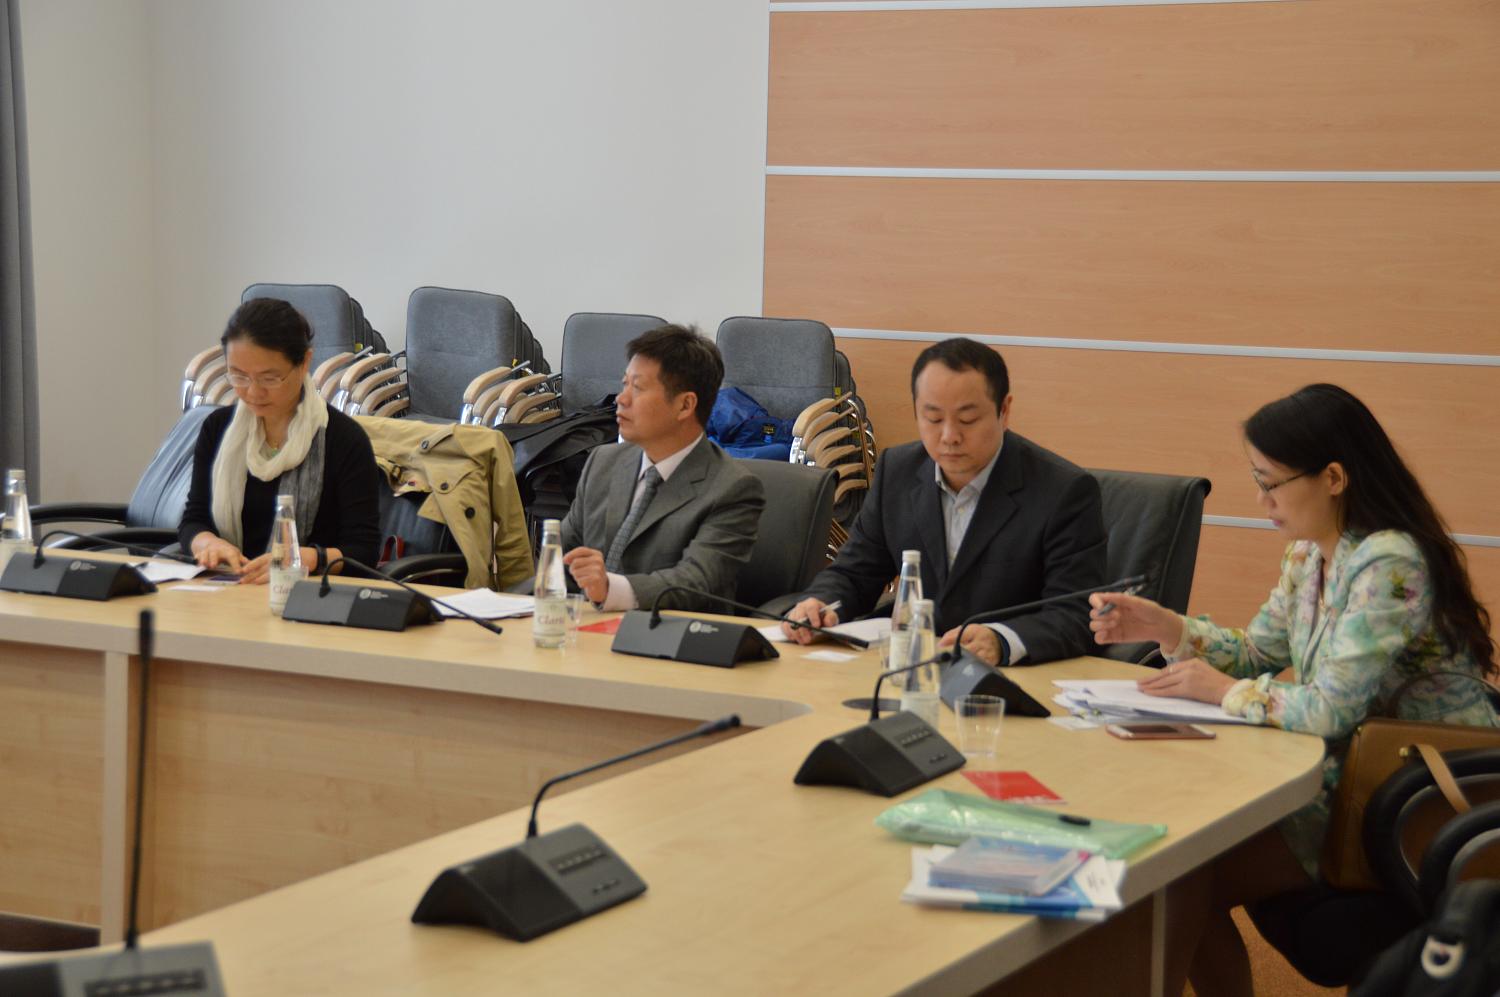 A meeting with representatives from the province of Guangdong, China